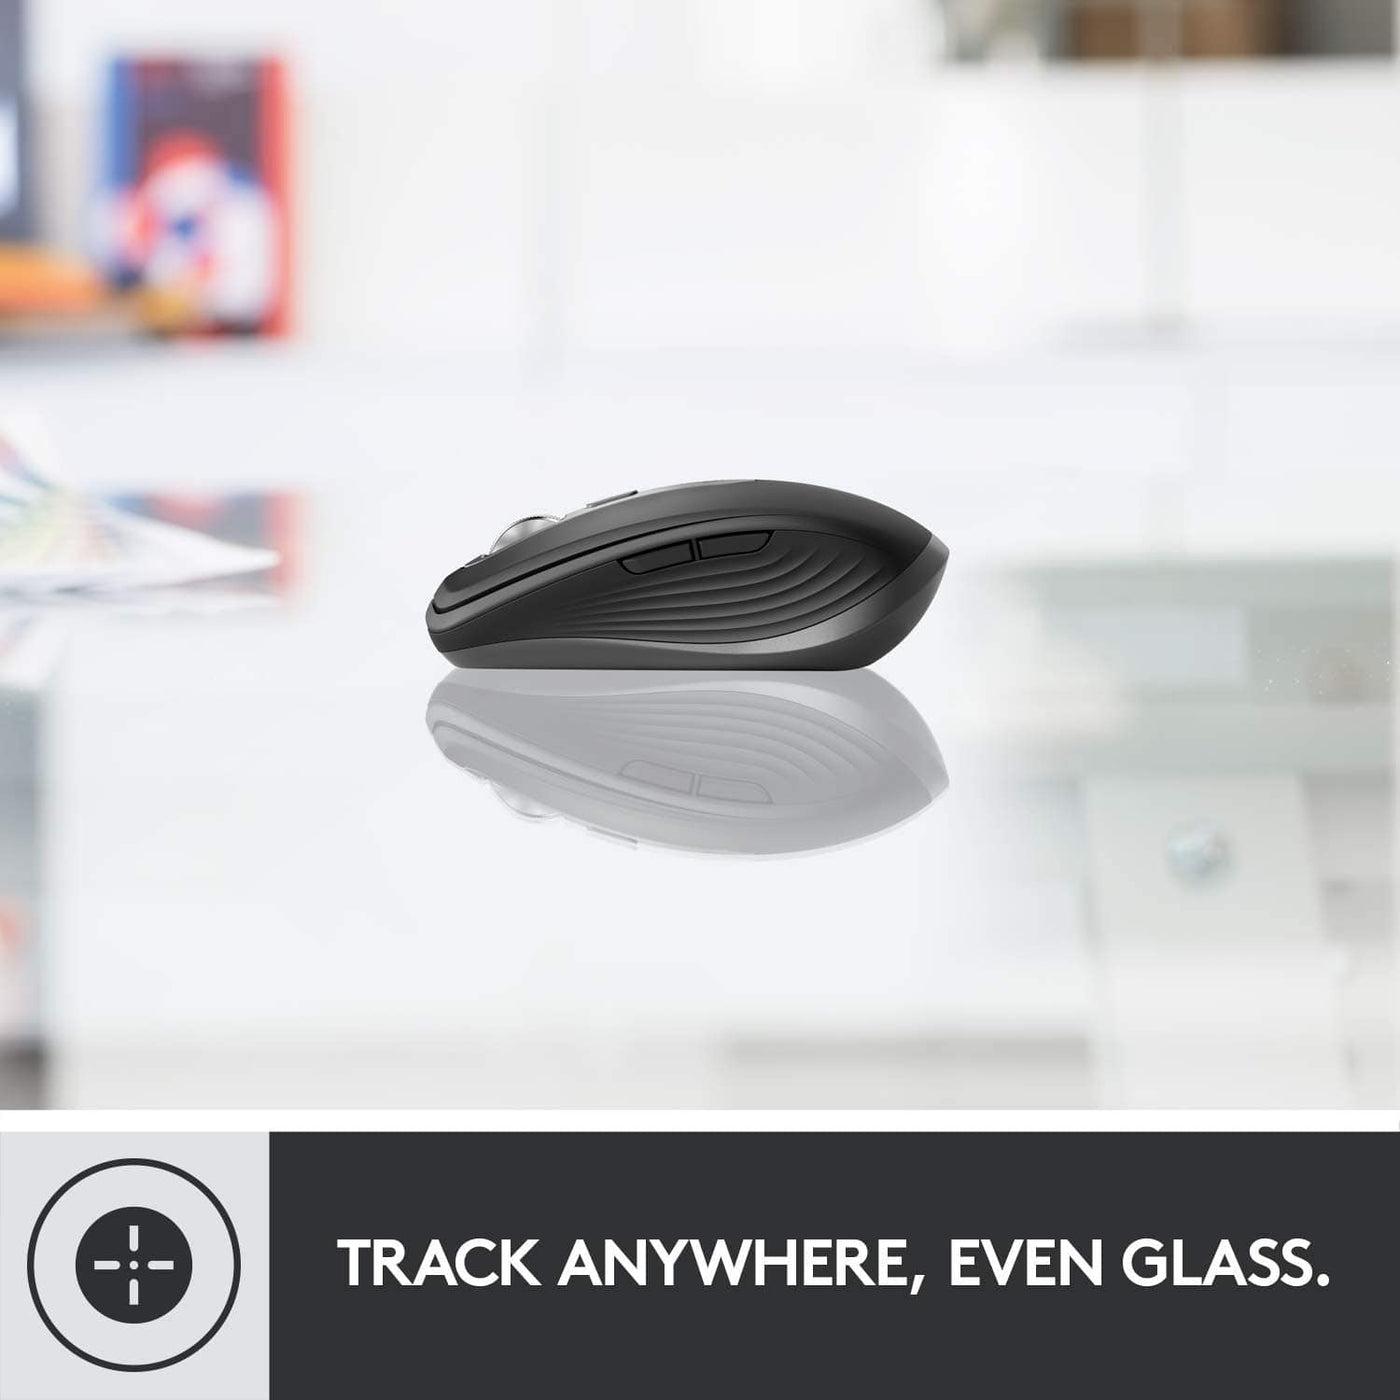 Logitech MX Anywhere 3 Compact Performance Mouse - Wireless, Fast Scrolling - Smart Tech Shopping